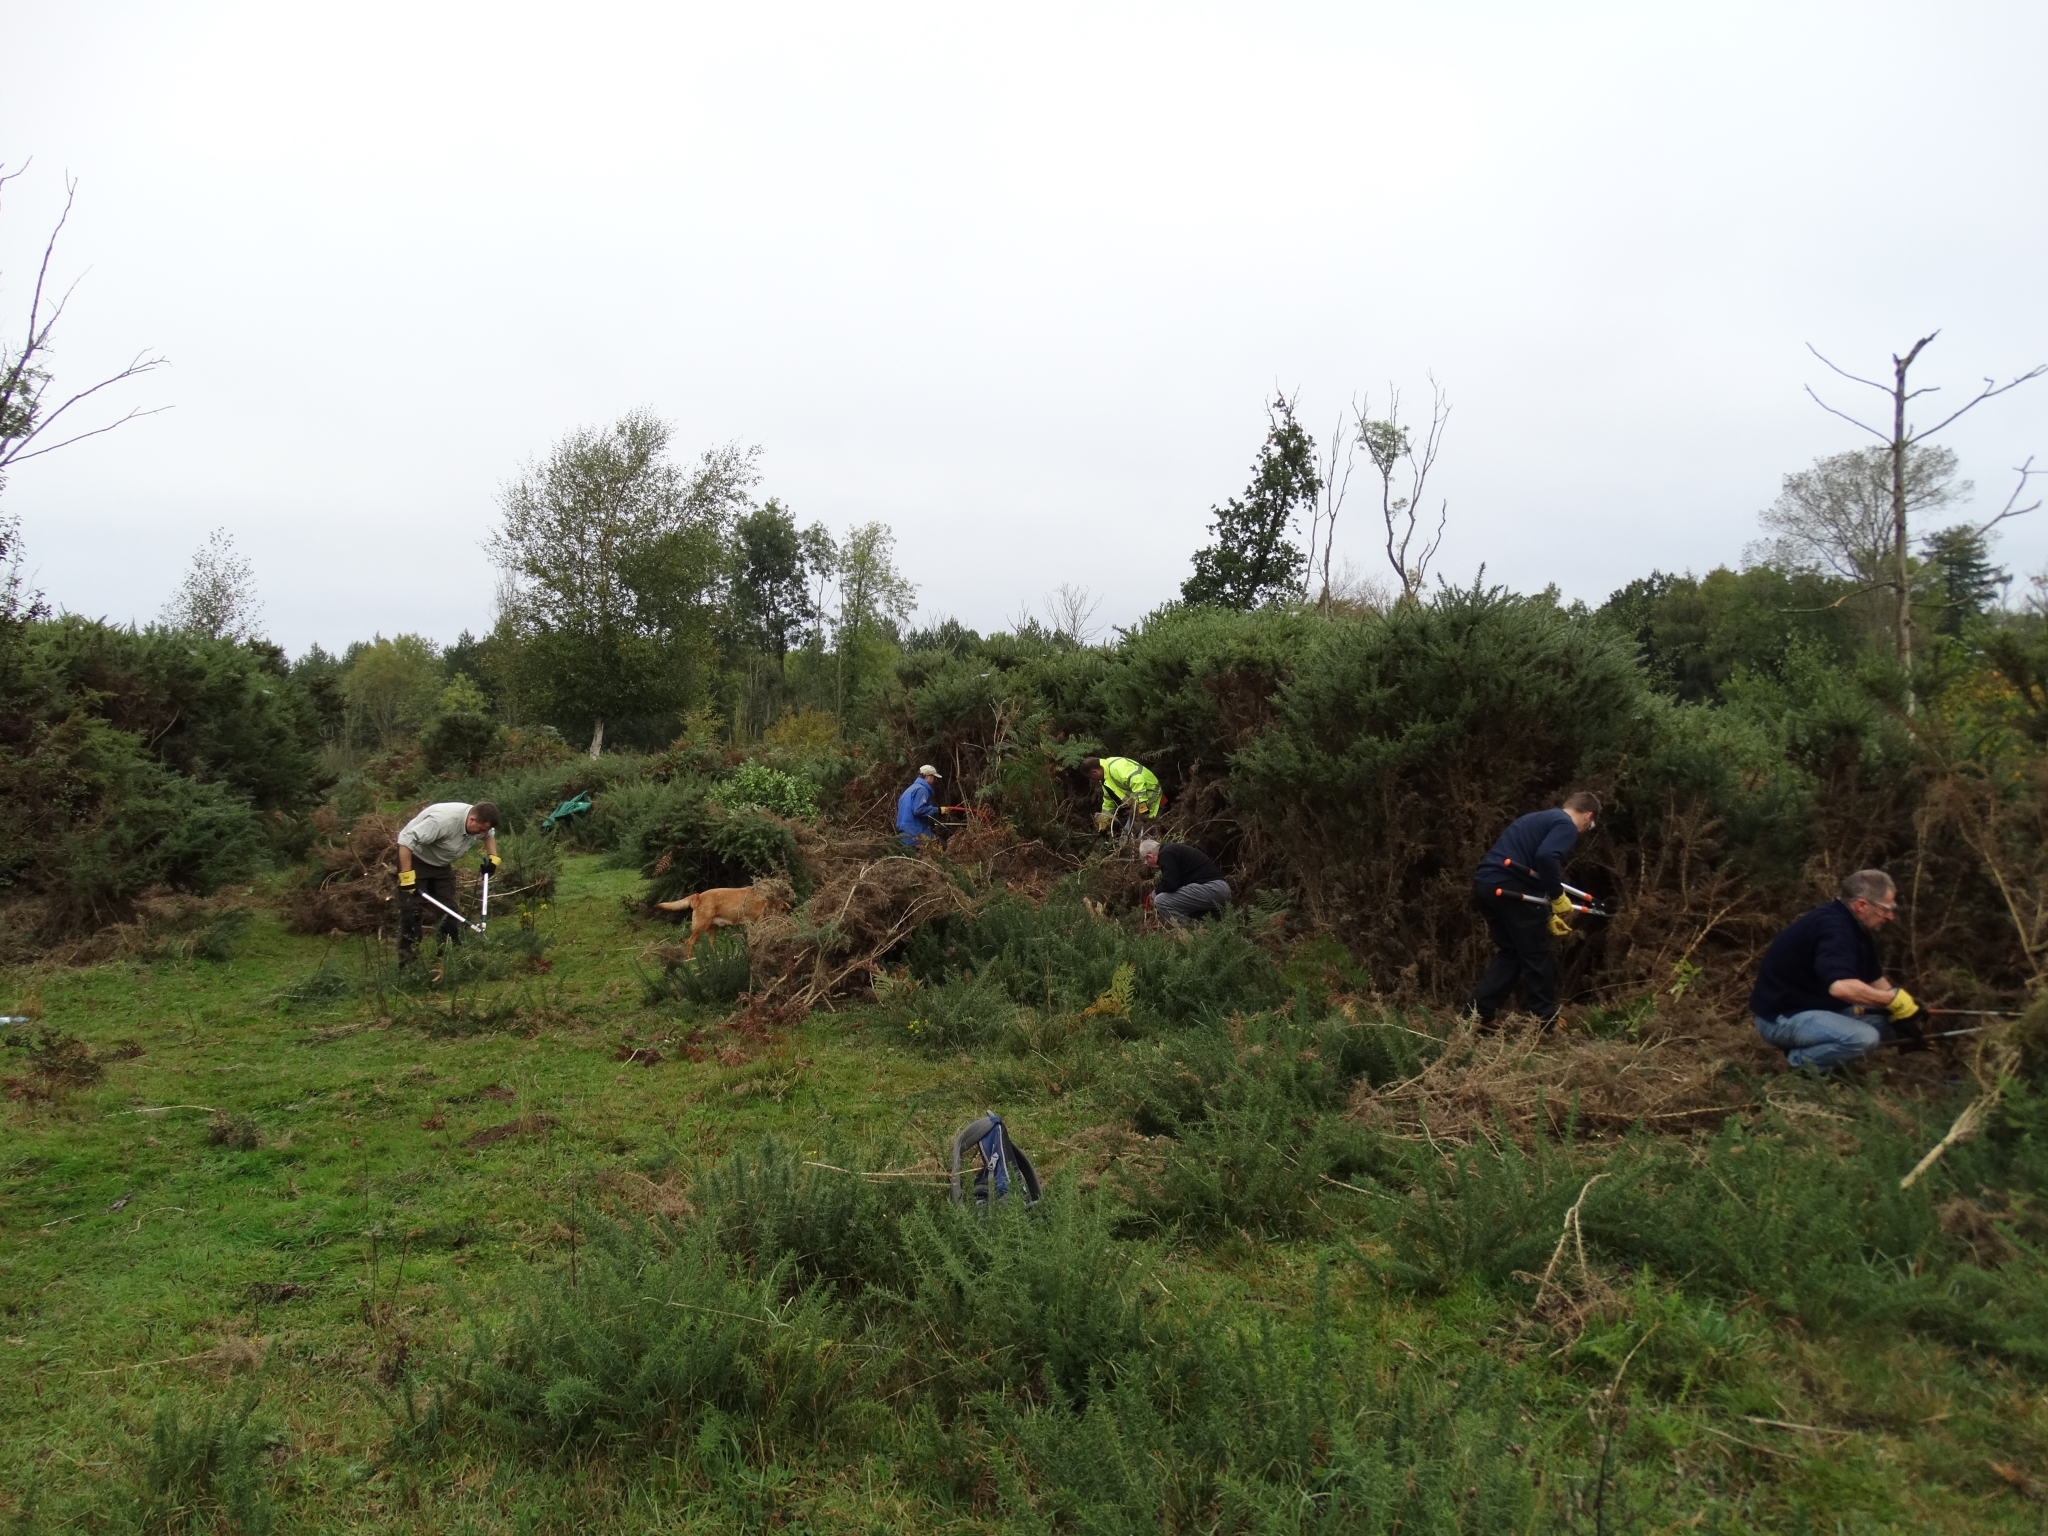 A photo from the FoTF Conservation Event - October 2019 - Gorse Clearance at Hockham Hills & Holes : Volunteers work to remove Gorse